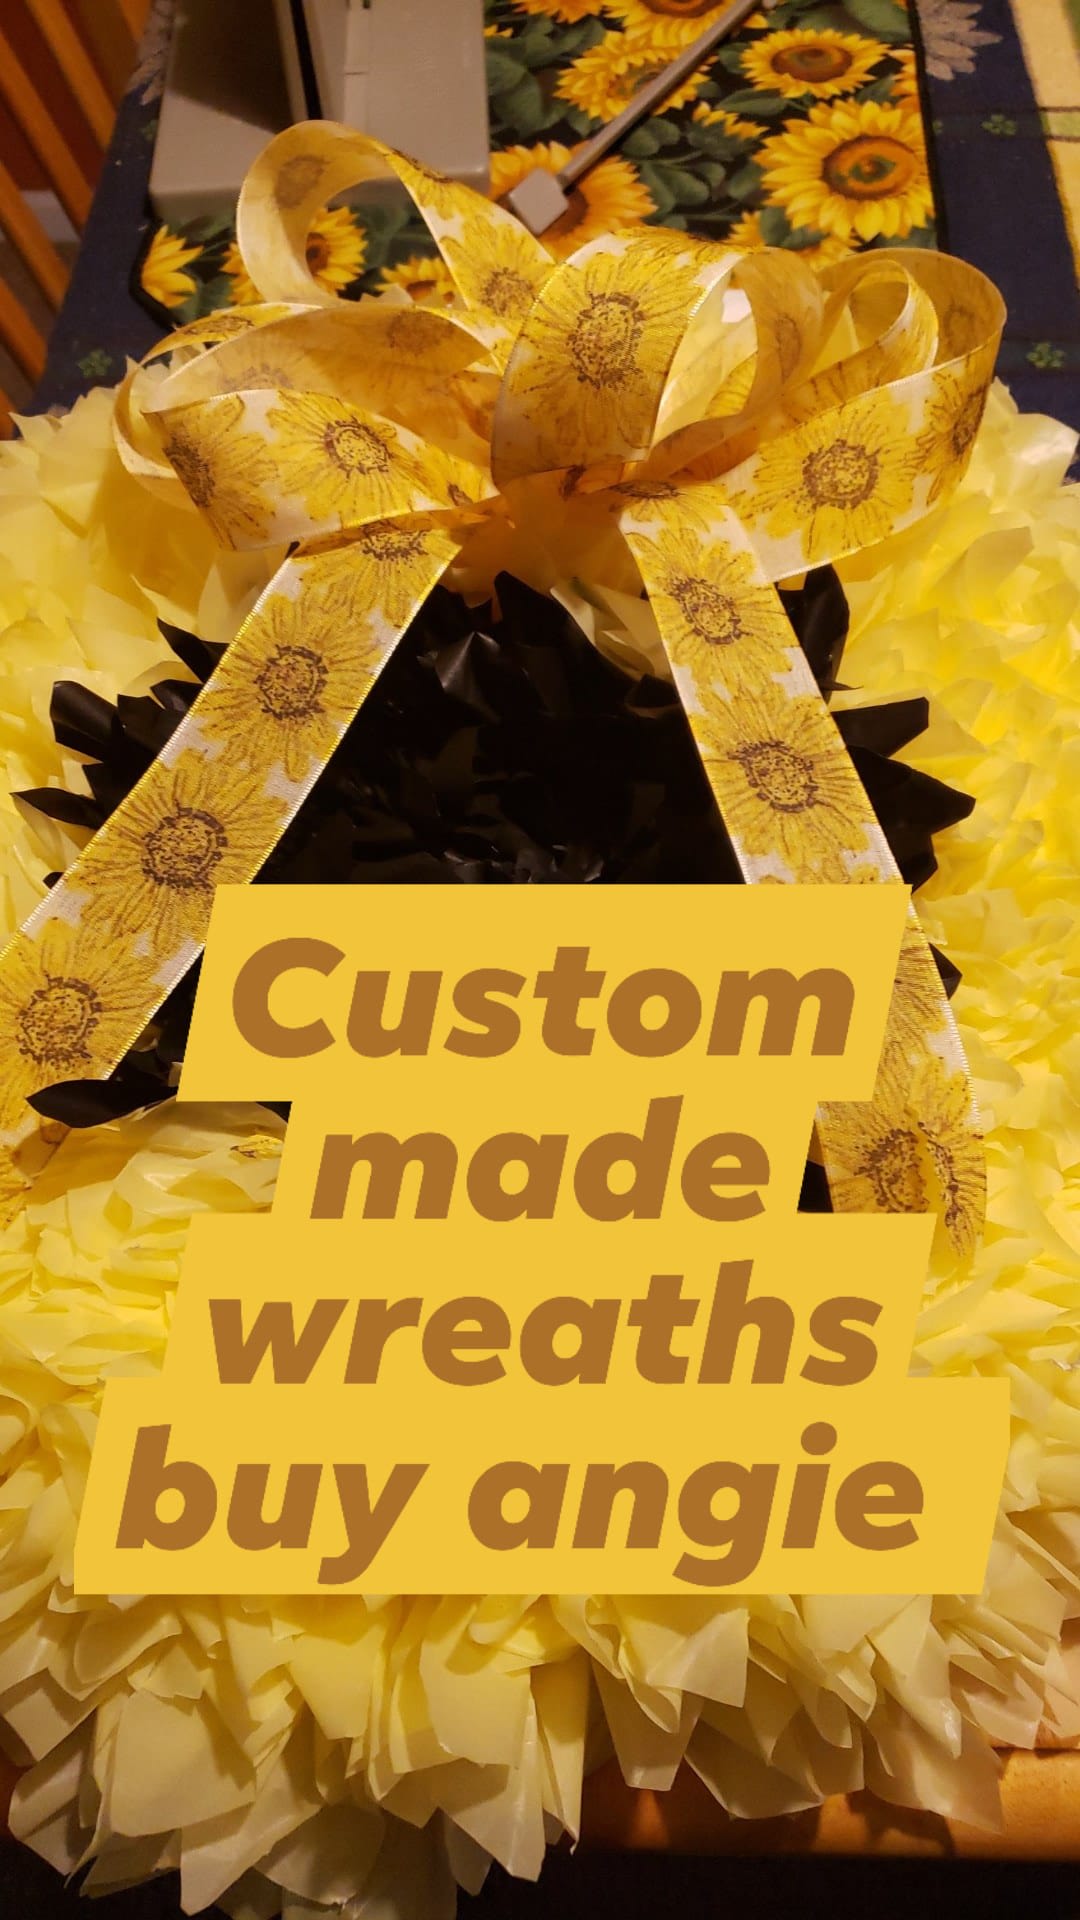 Custom Made Wreaths By Angie